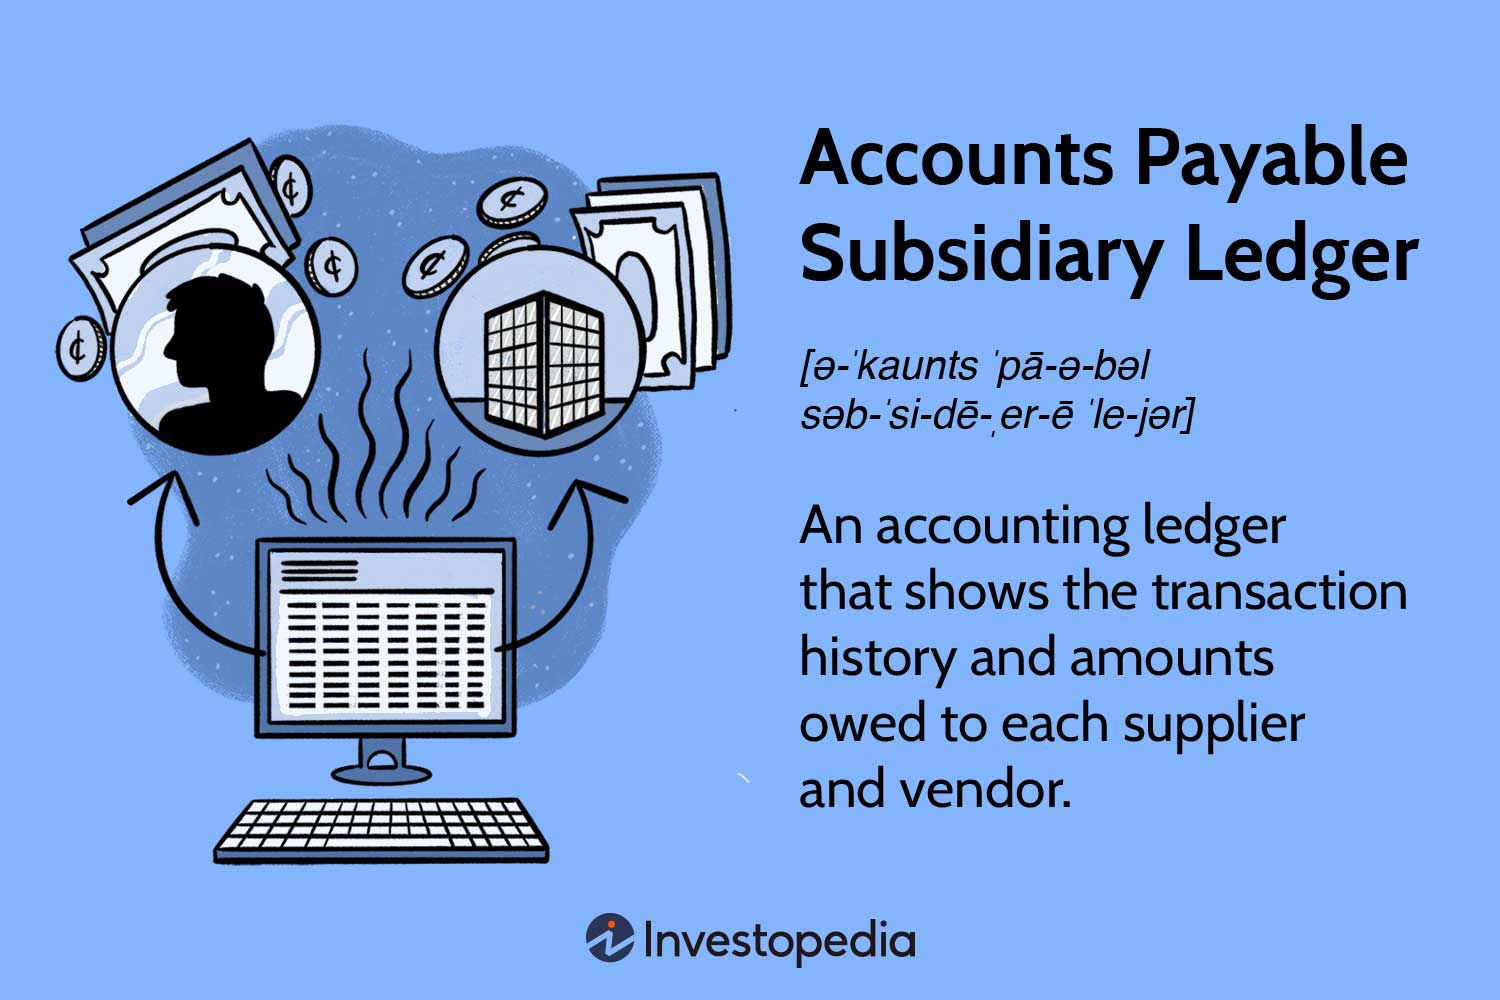 What is an Accounts Payable Ledger?